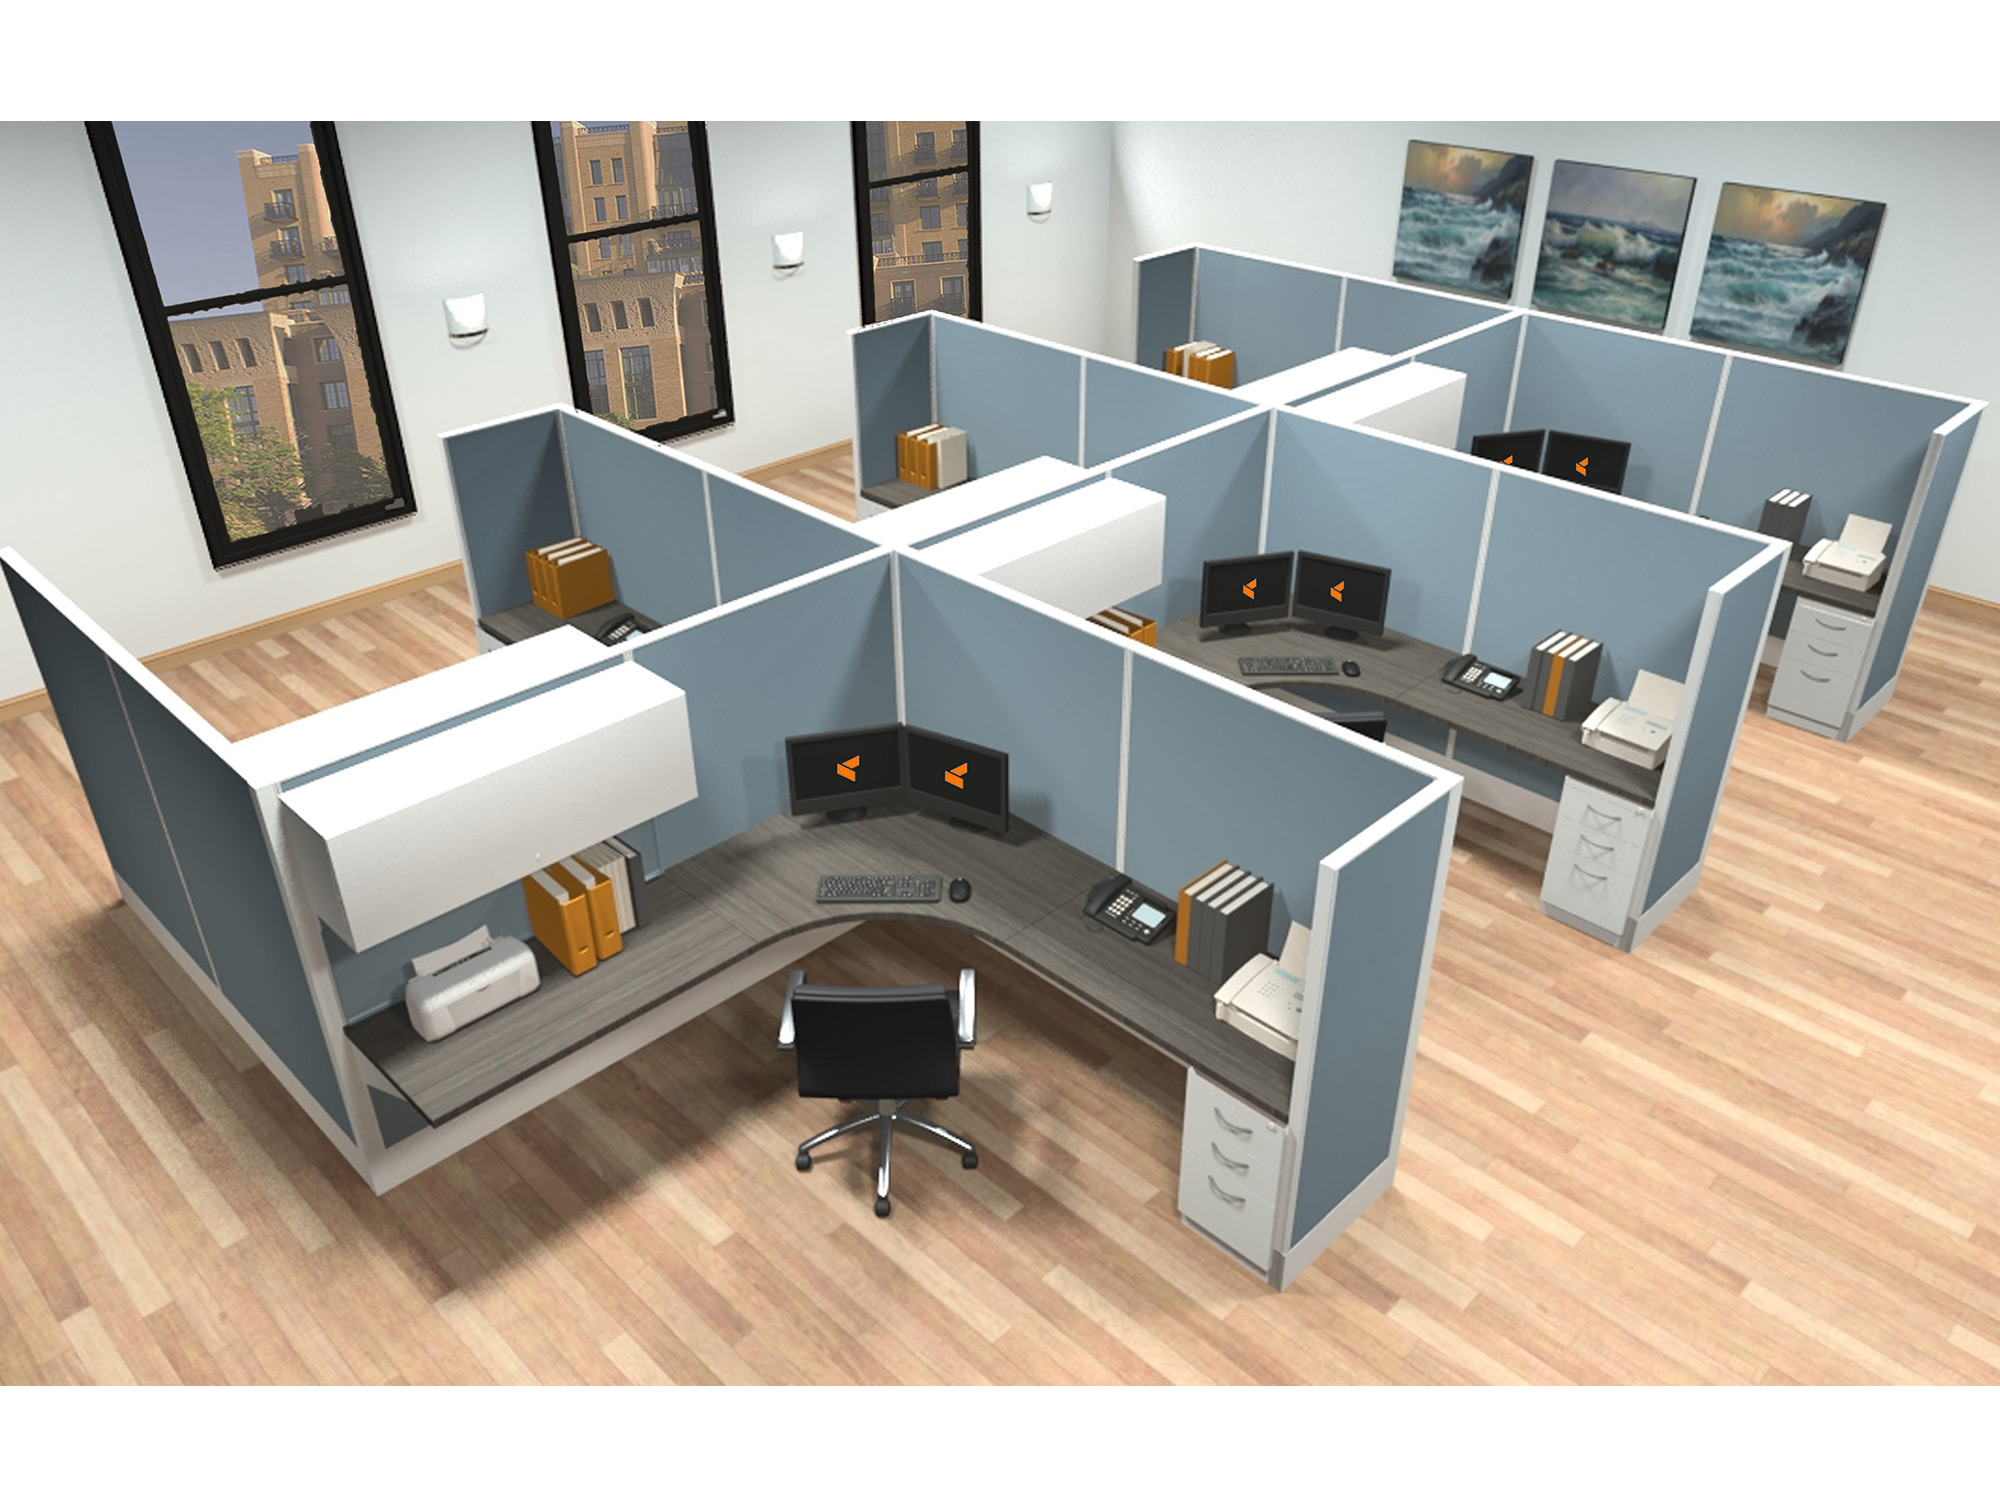 8x8 modular workstations from AIS - 6 Pack Cluster